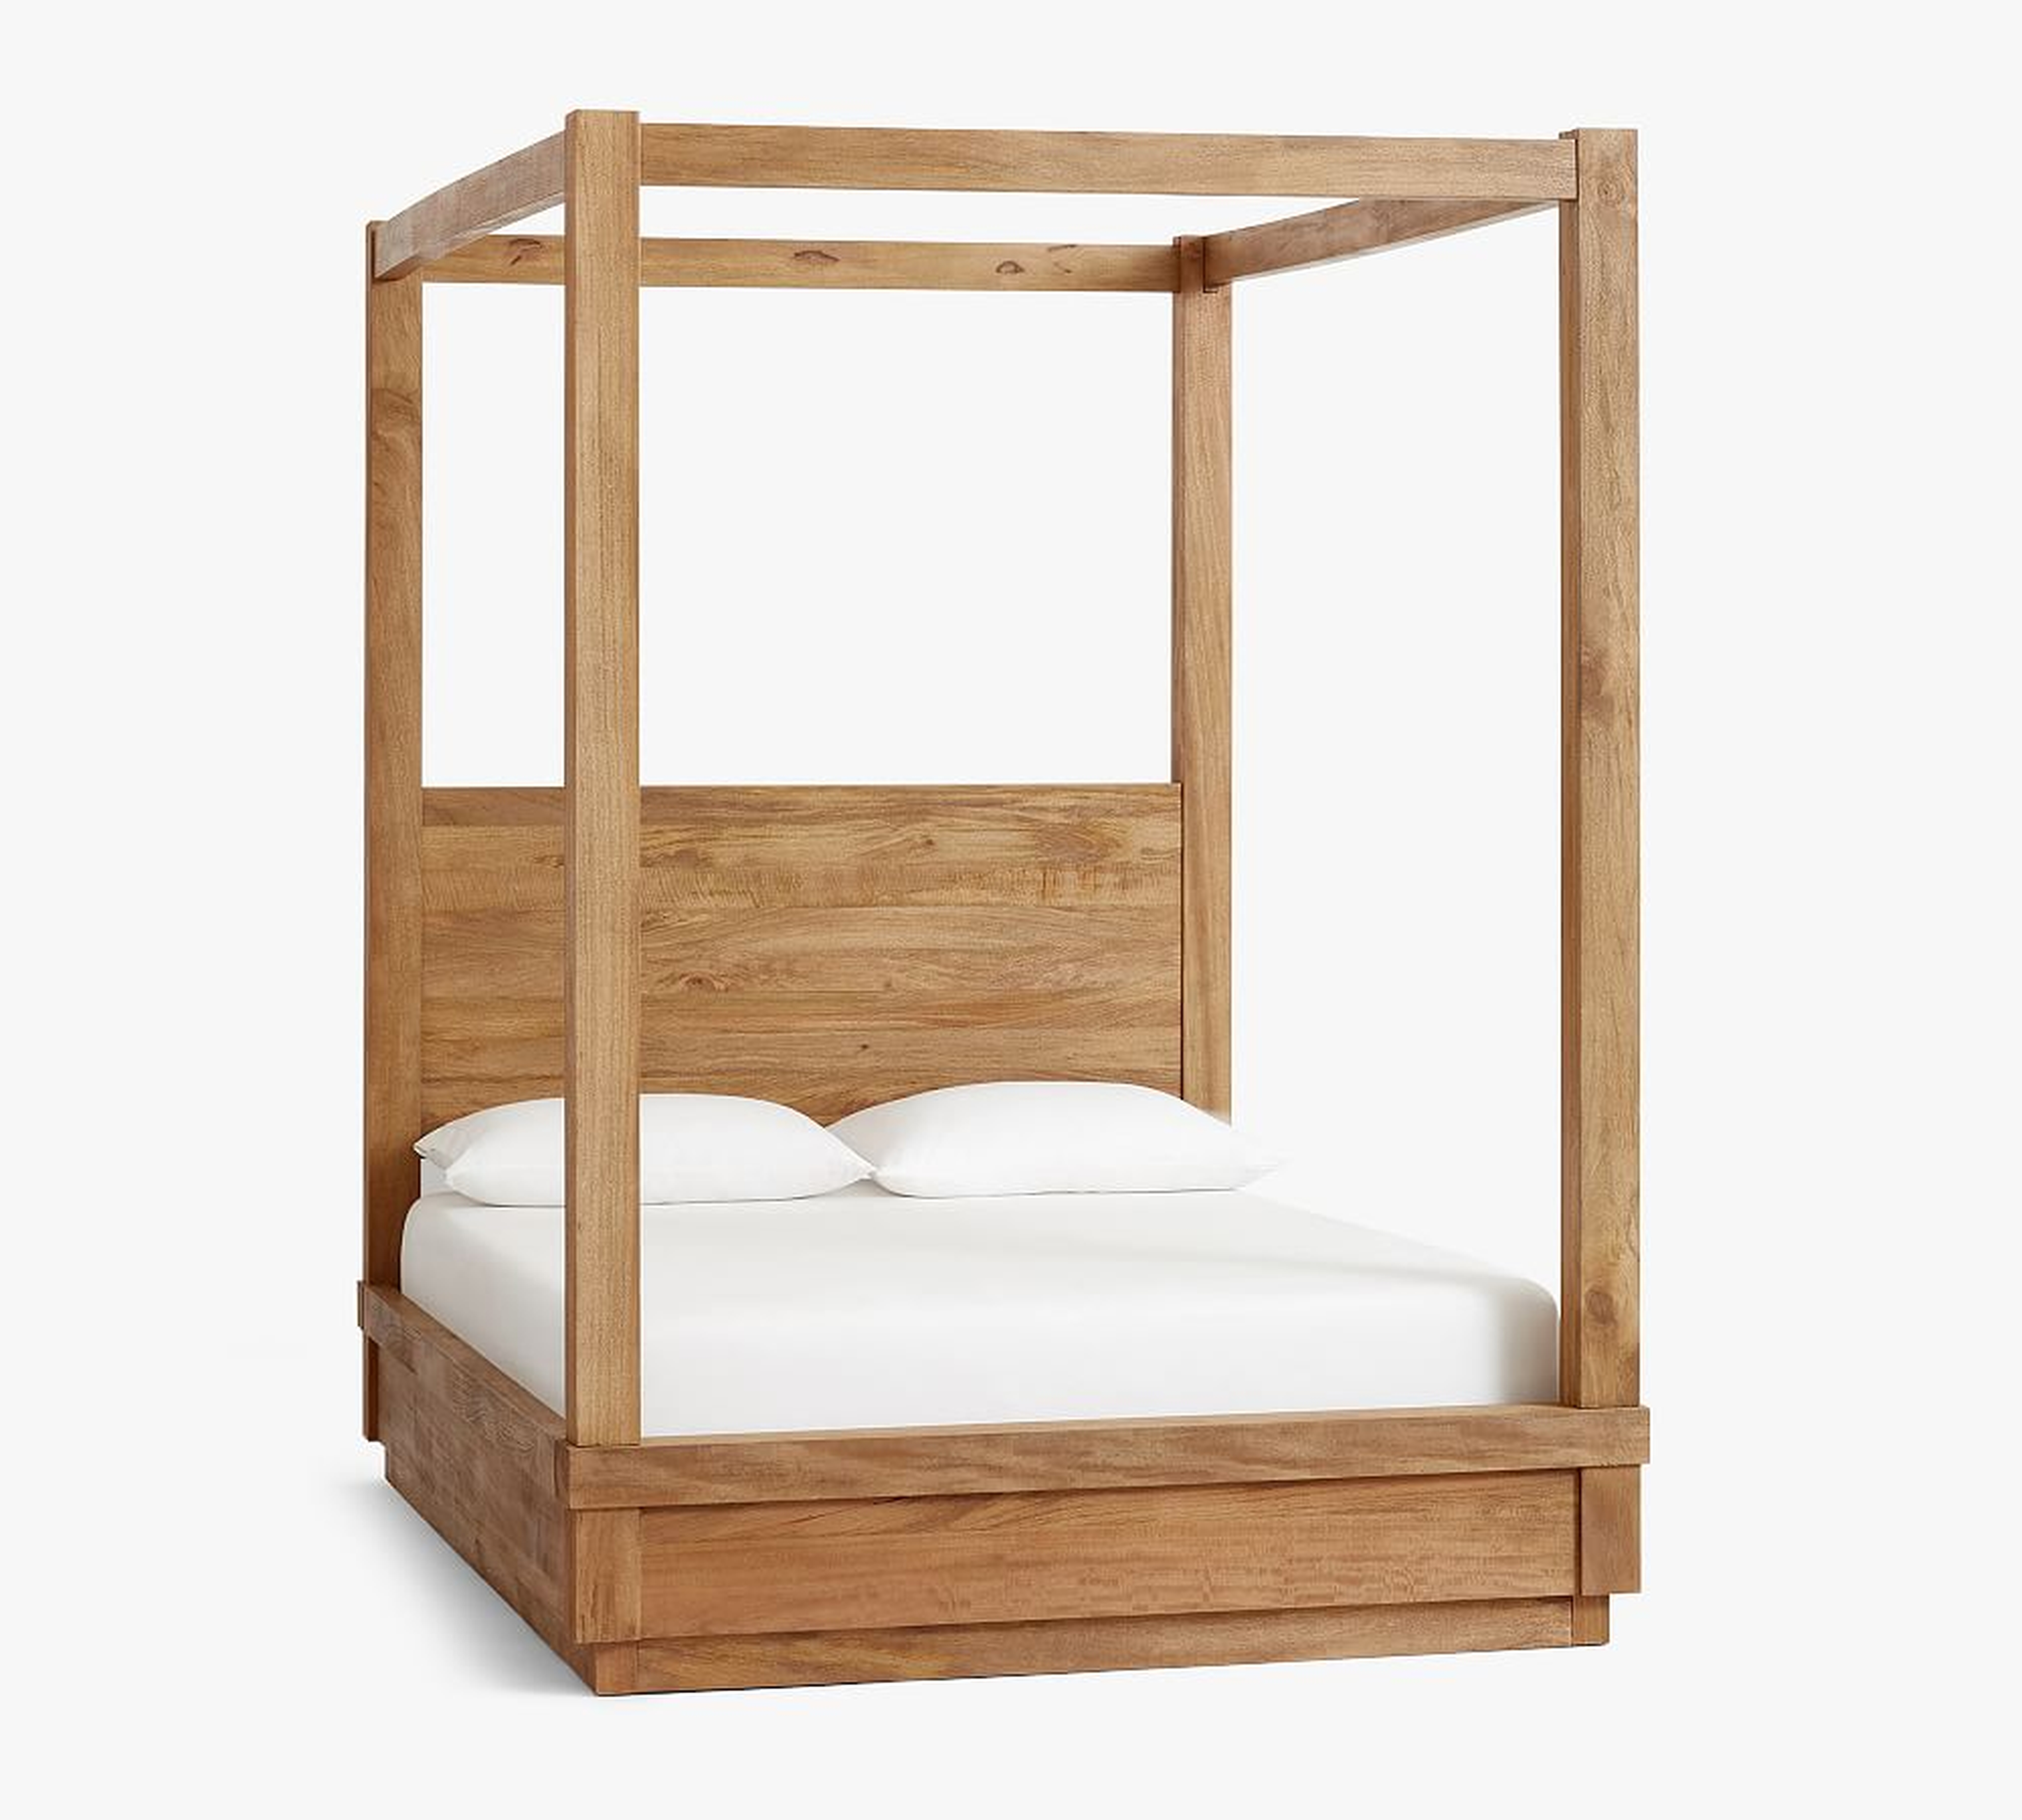 Oakleigh Wood Canopy Bed, King, Heirloom Wheat - Pottery Barn